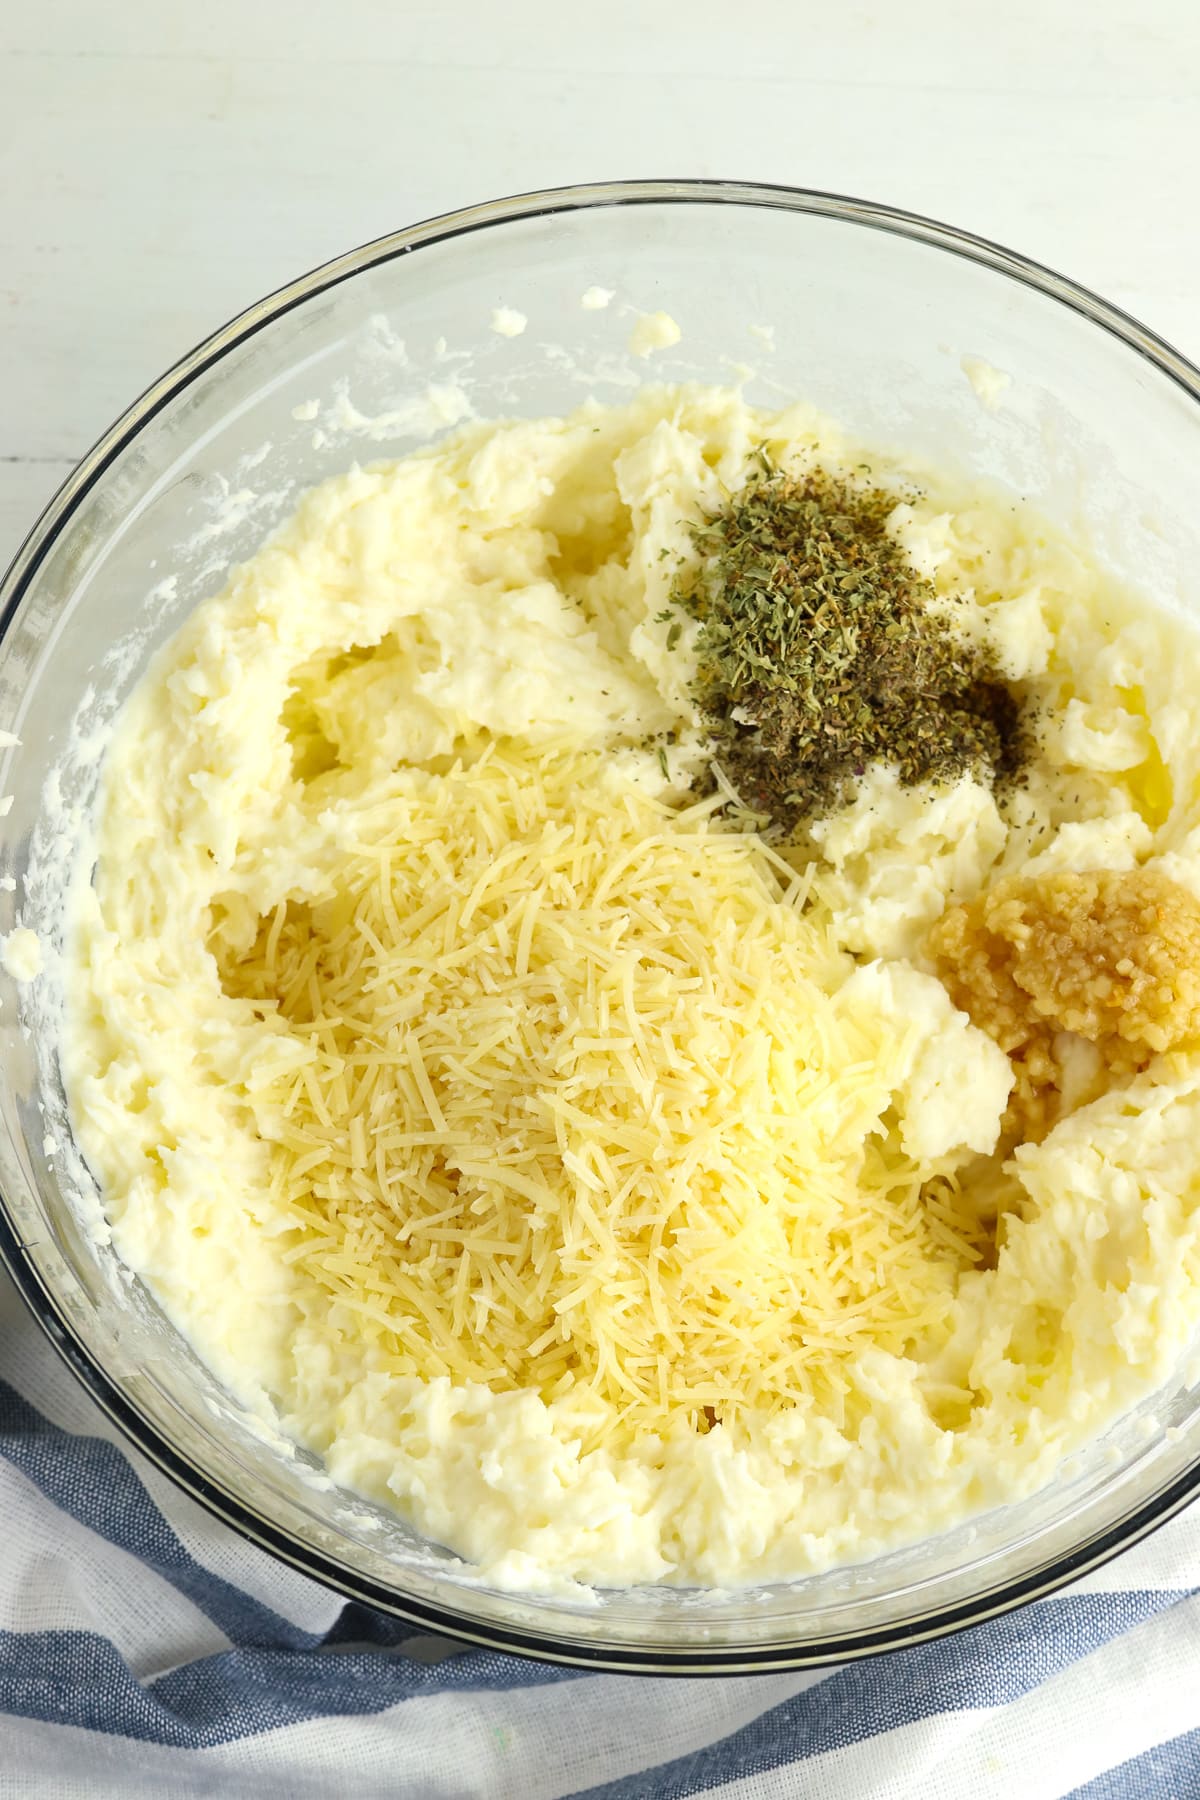 A large mixing bowl of mashed potatoes with cheese and herbs in it